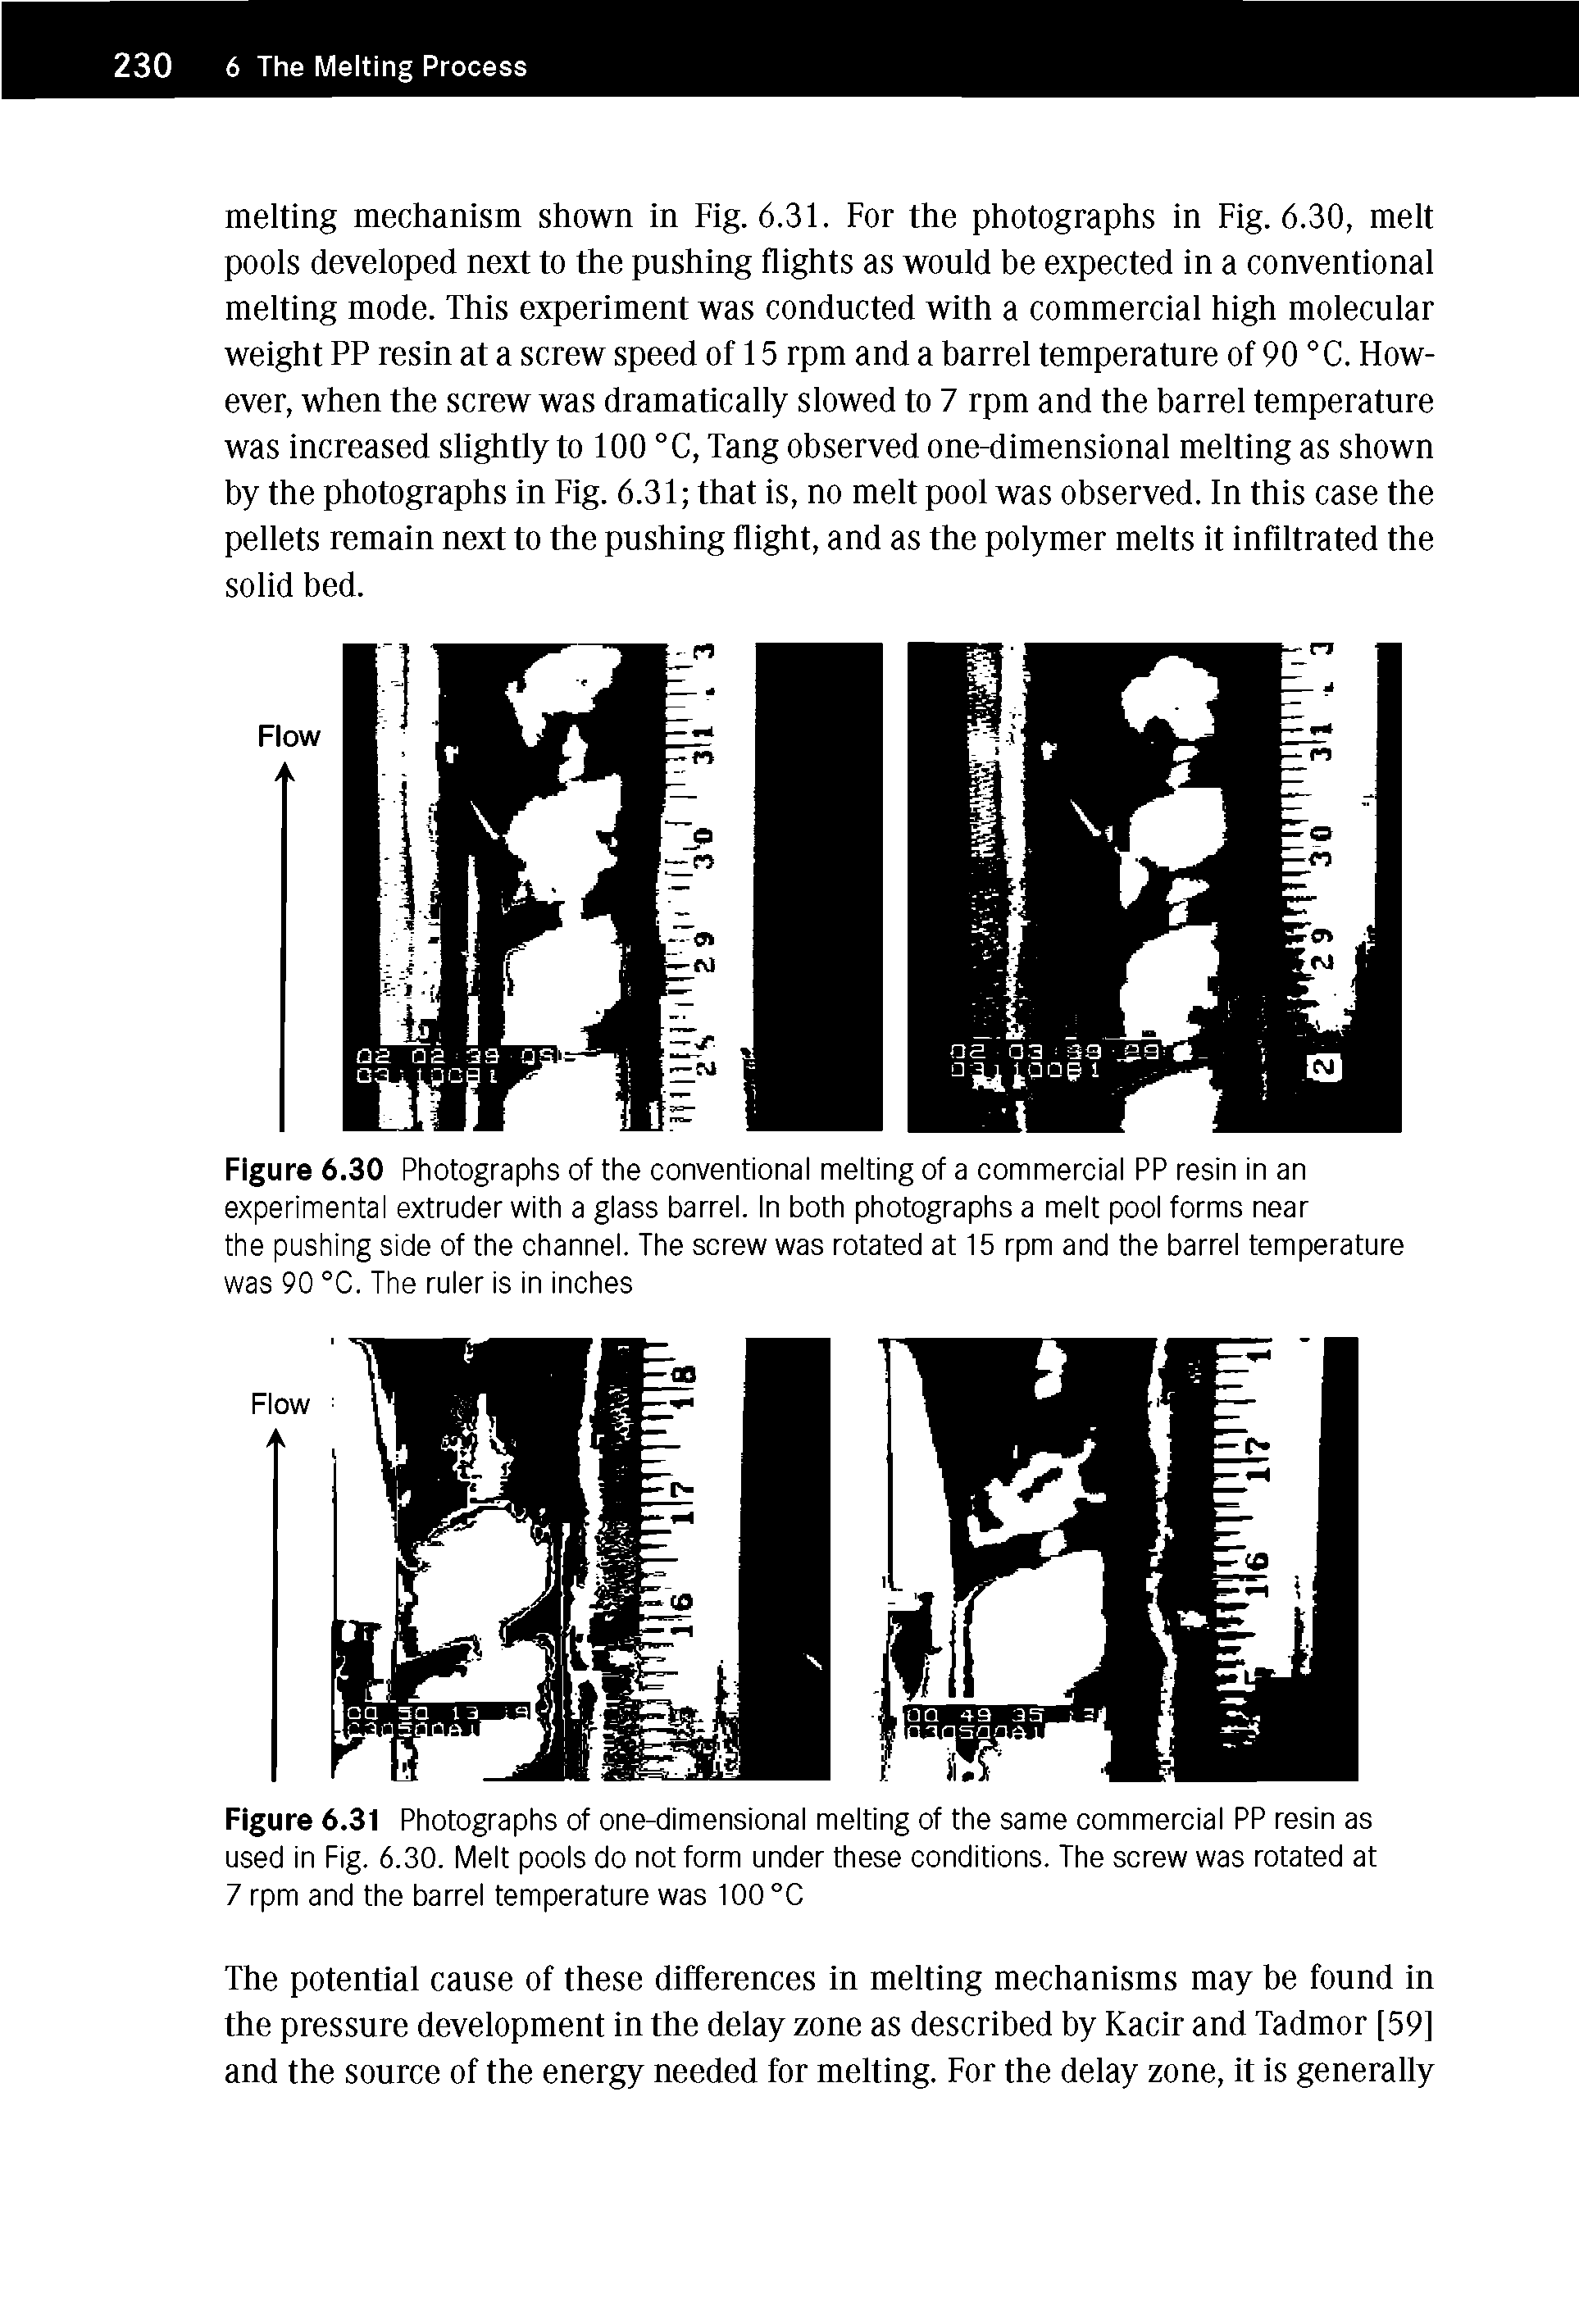 Figure 6.31 Photographs of one-dimensional melting of the same commercial PP resin as used in Fig. 6.30. Melt pools do not form under these conditions. The screw was rotated at 7 rpm and the barrel temperature was 100°C...